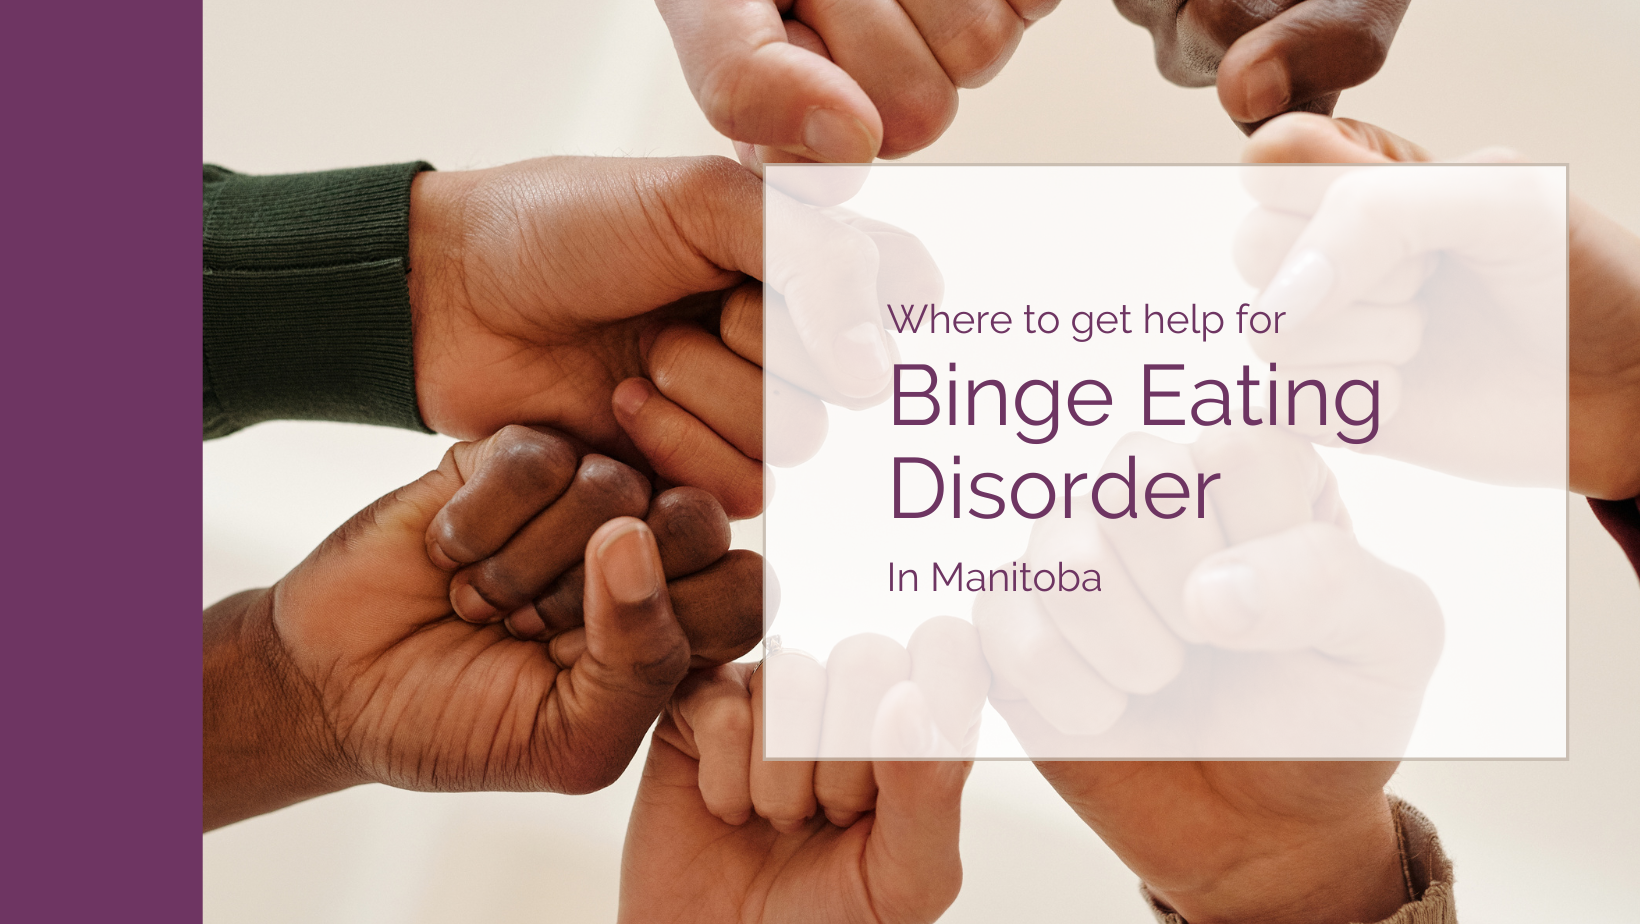 Where to get help for Binge Eating Disorder in Manitoba – A Little Nutrition